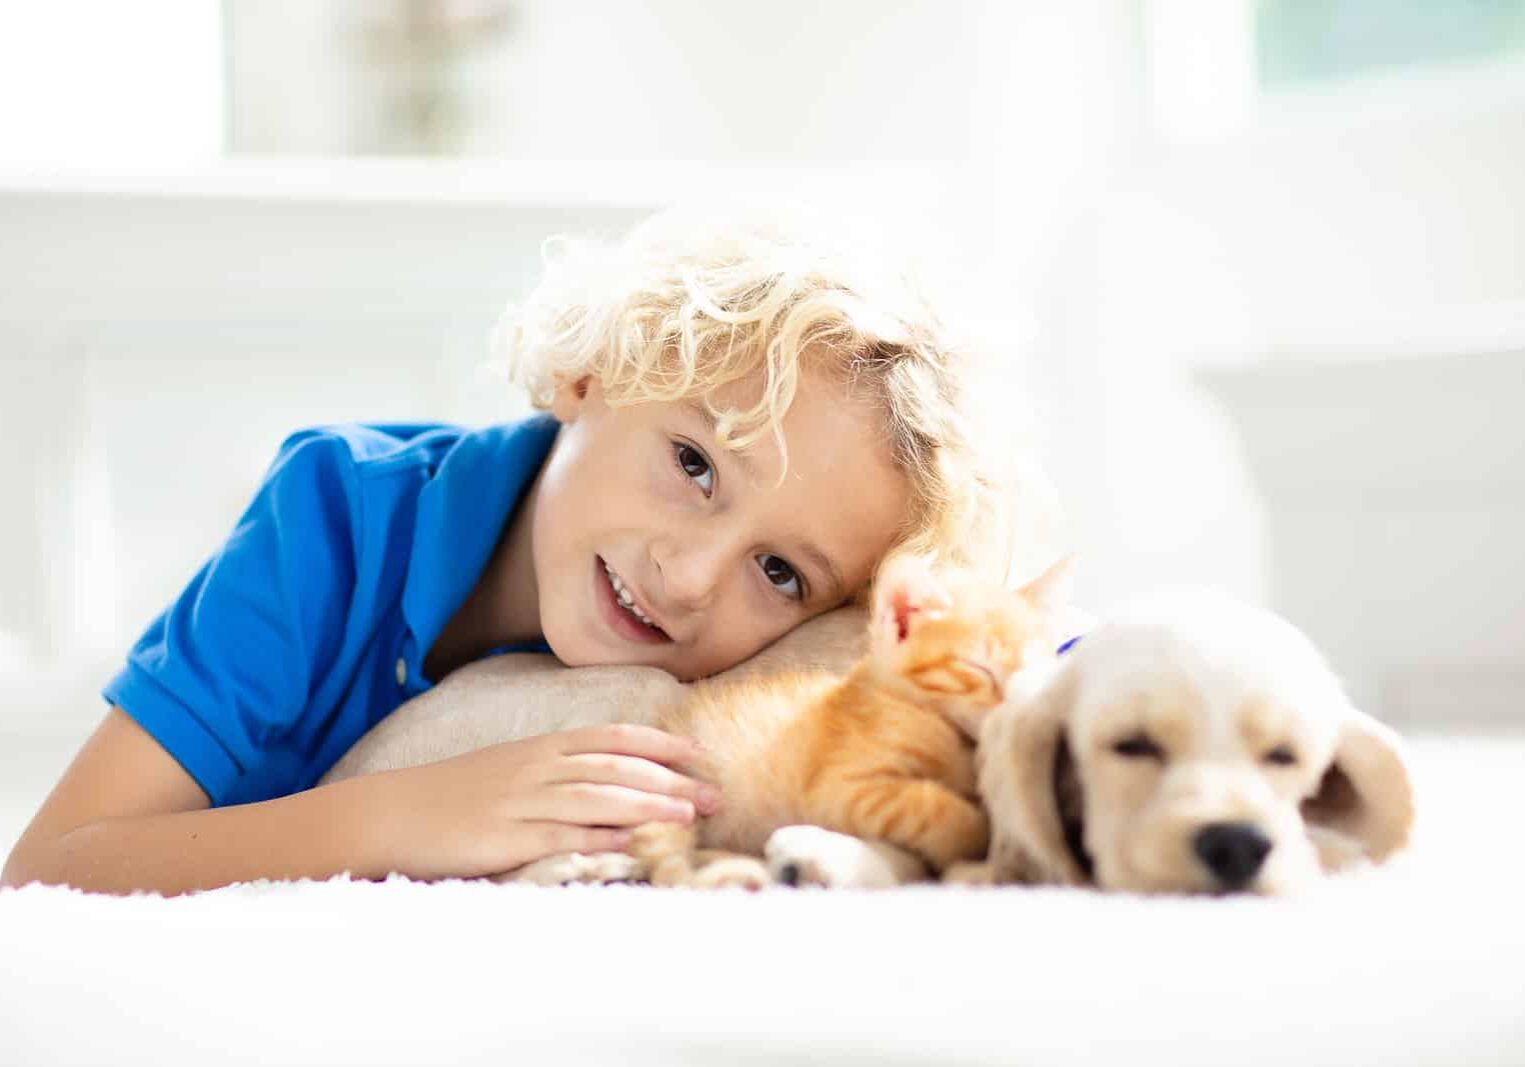 Child playing with baby dog and cat. Kids play with puppy and kitten. Little boy and American cocker spaniel on bed at home.